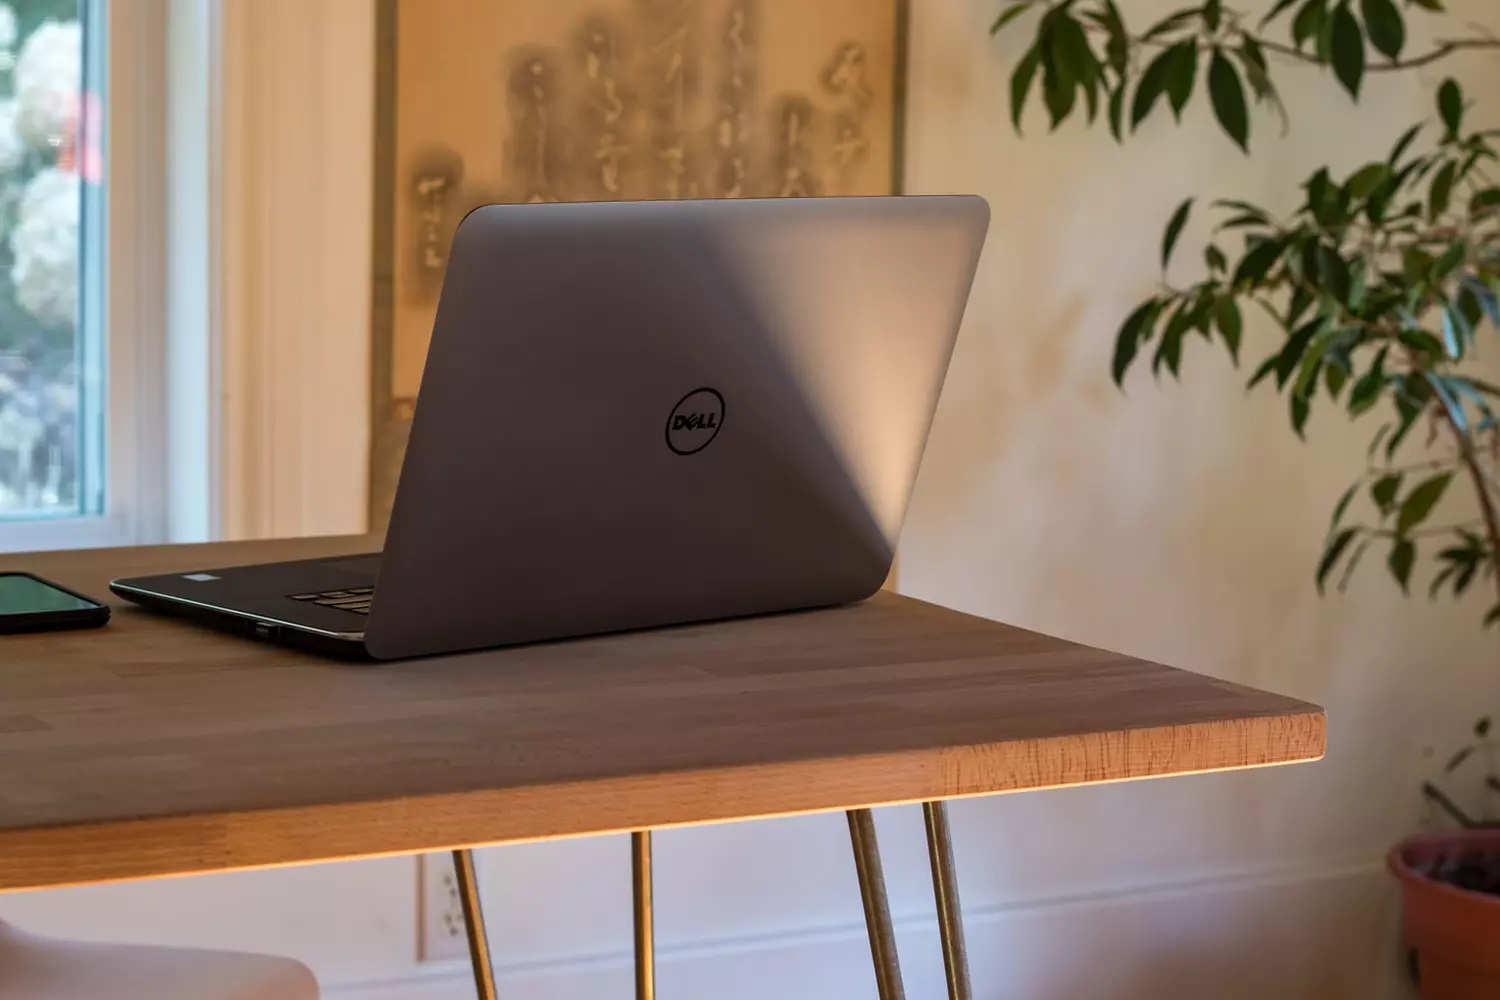 how-to-hard-reset-dell-laptop-without-password